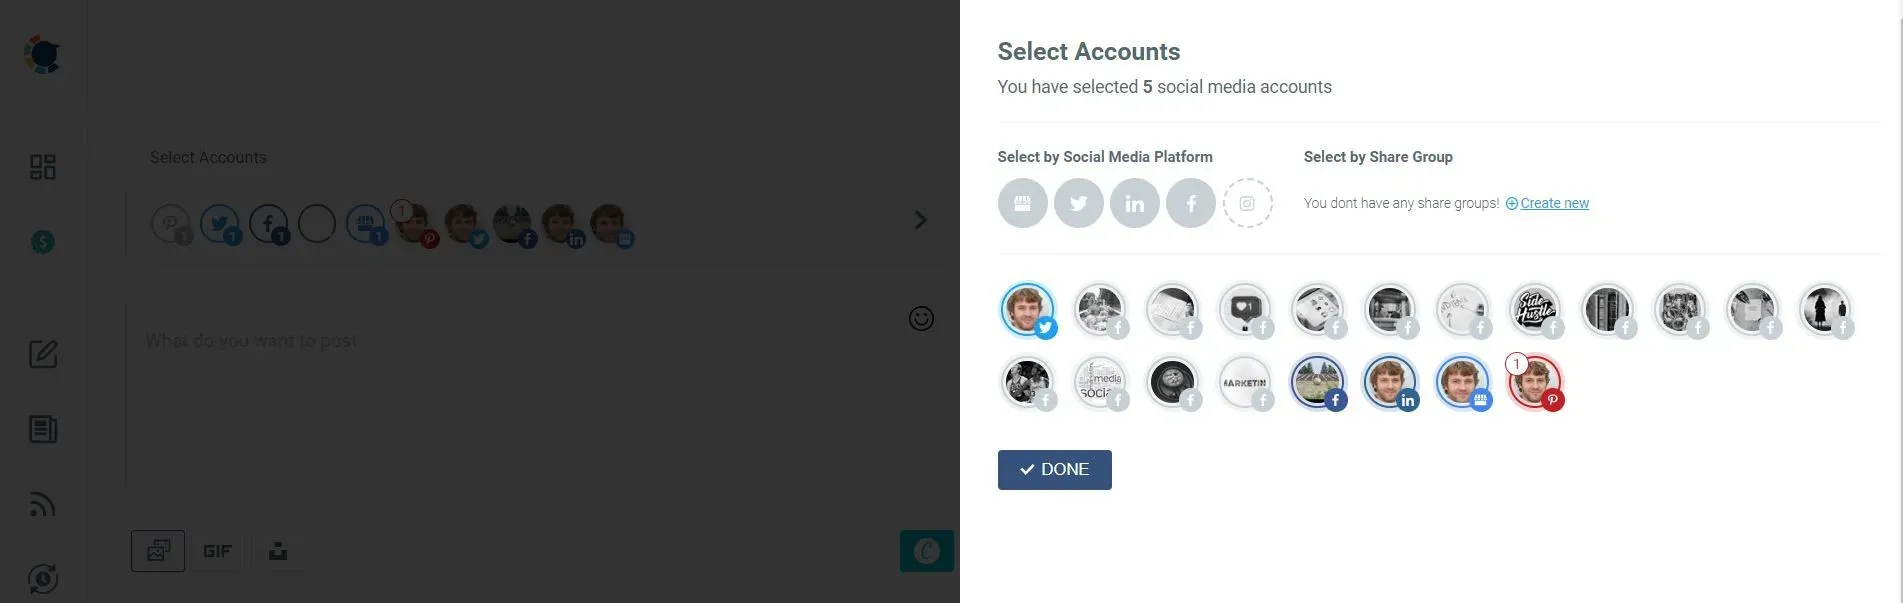 You can connect various accounts on Circleboom and manage them all in one place